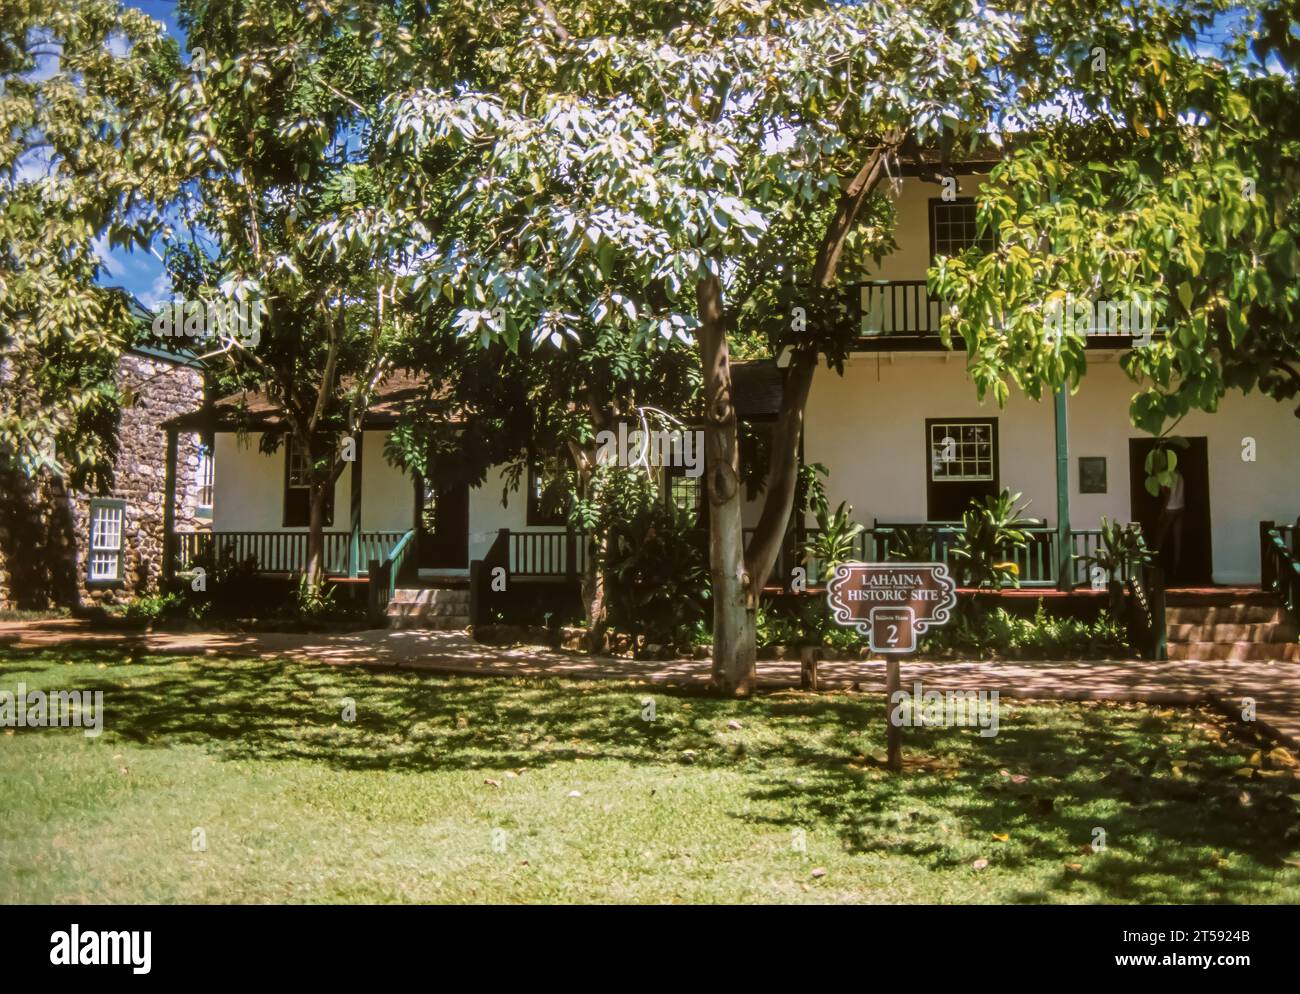 Lahaina, Maui, Hawaii, June 2, 1989 - Old Slide of Historic Site, the Baldwin Home in Lahaina Harbor, on a Beautiful Sunny Summer Day Stock Photo